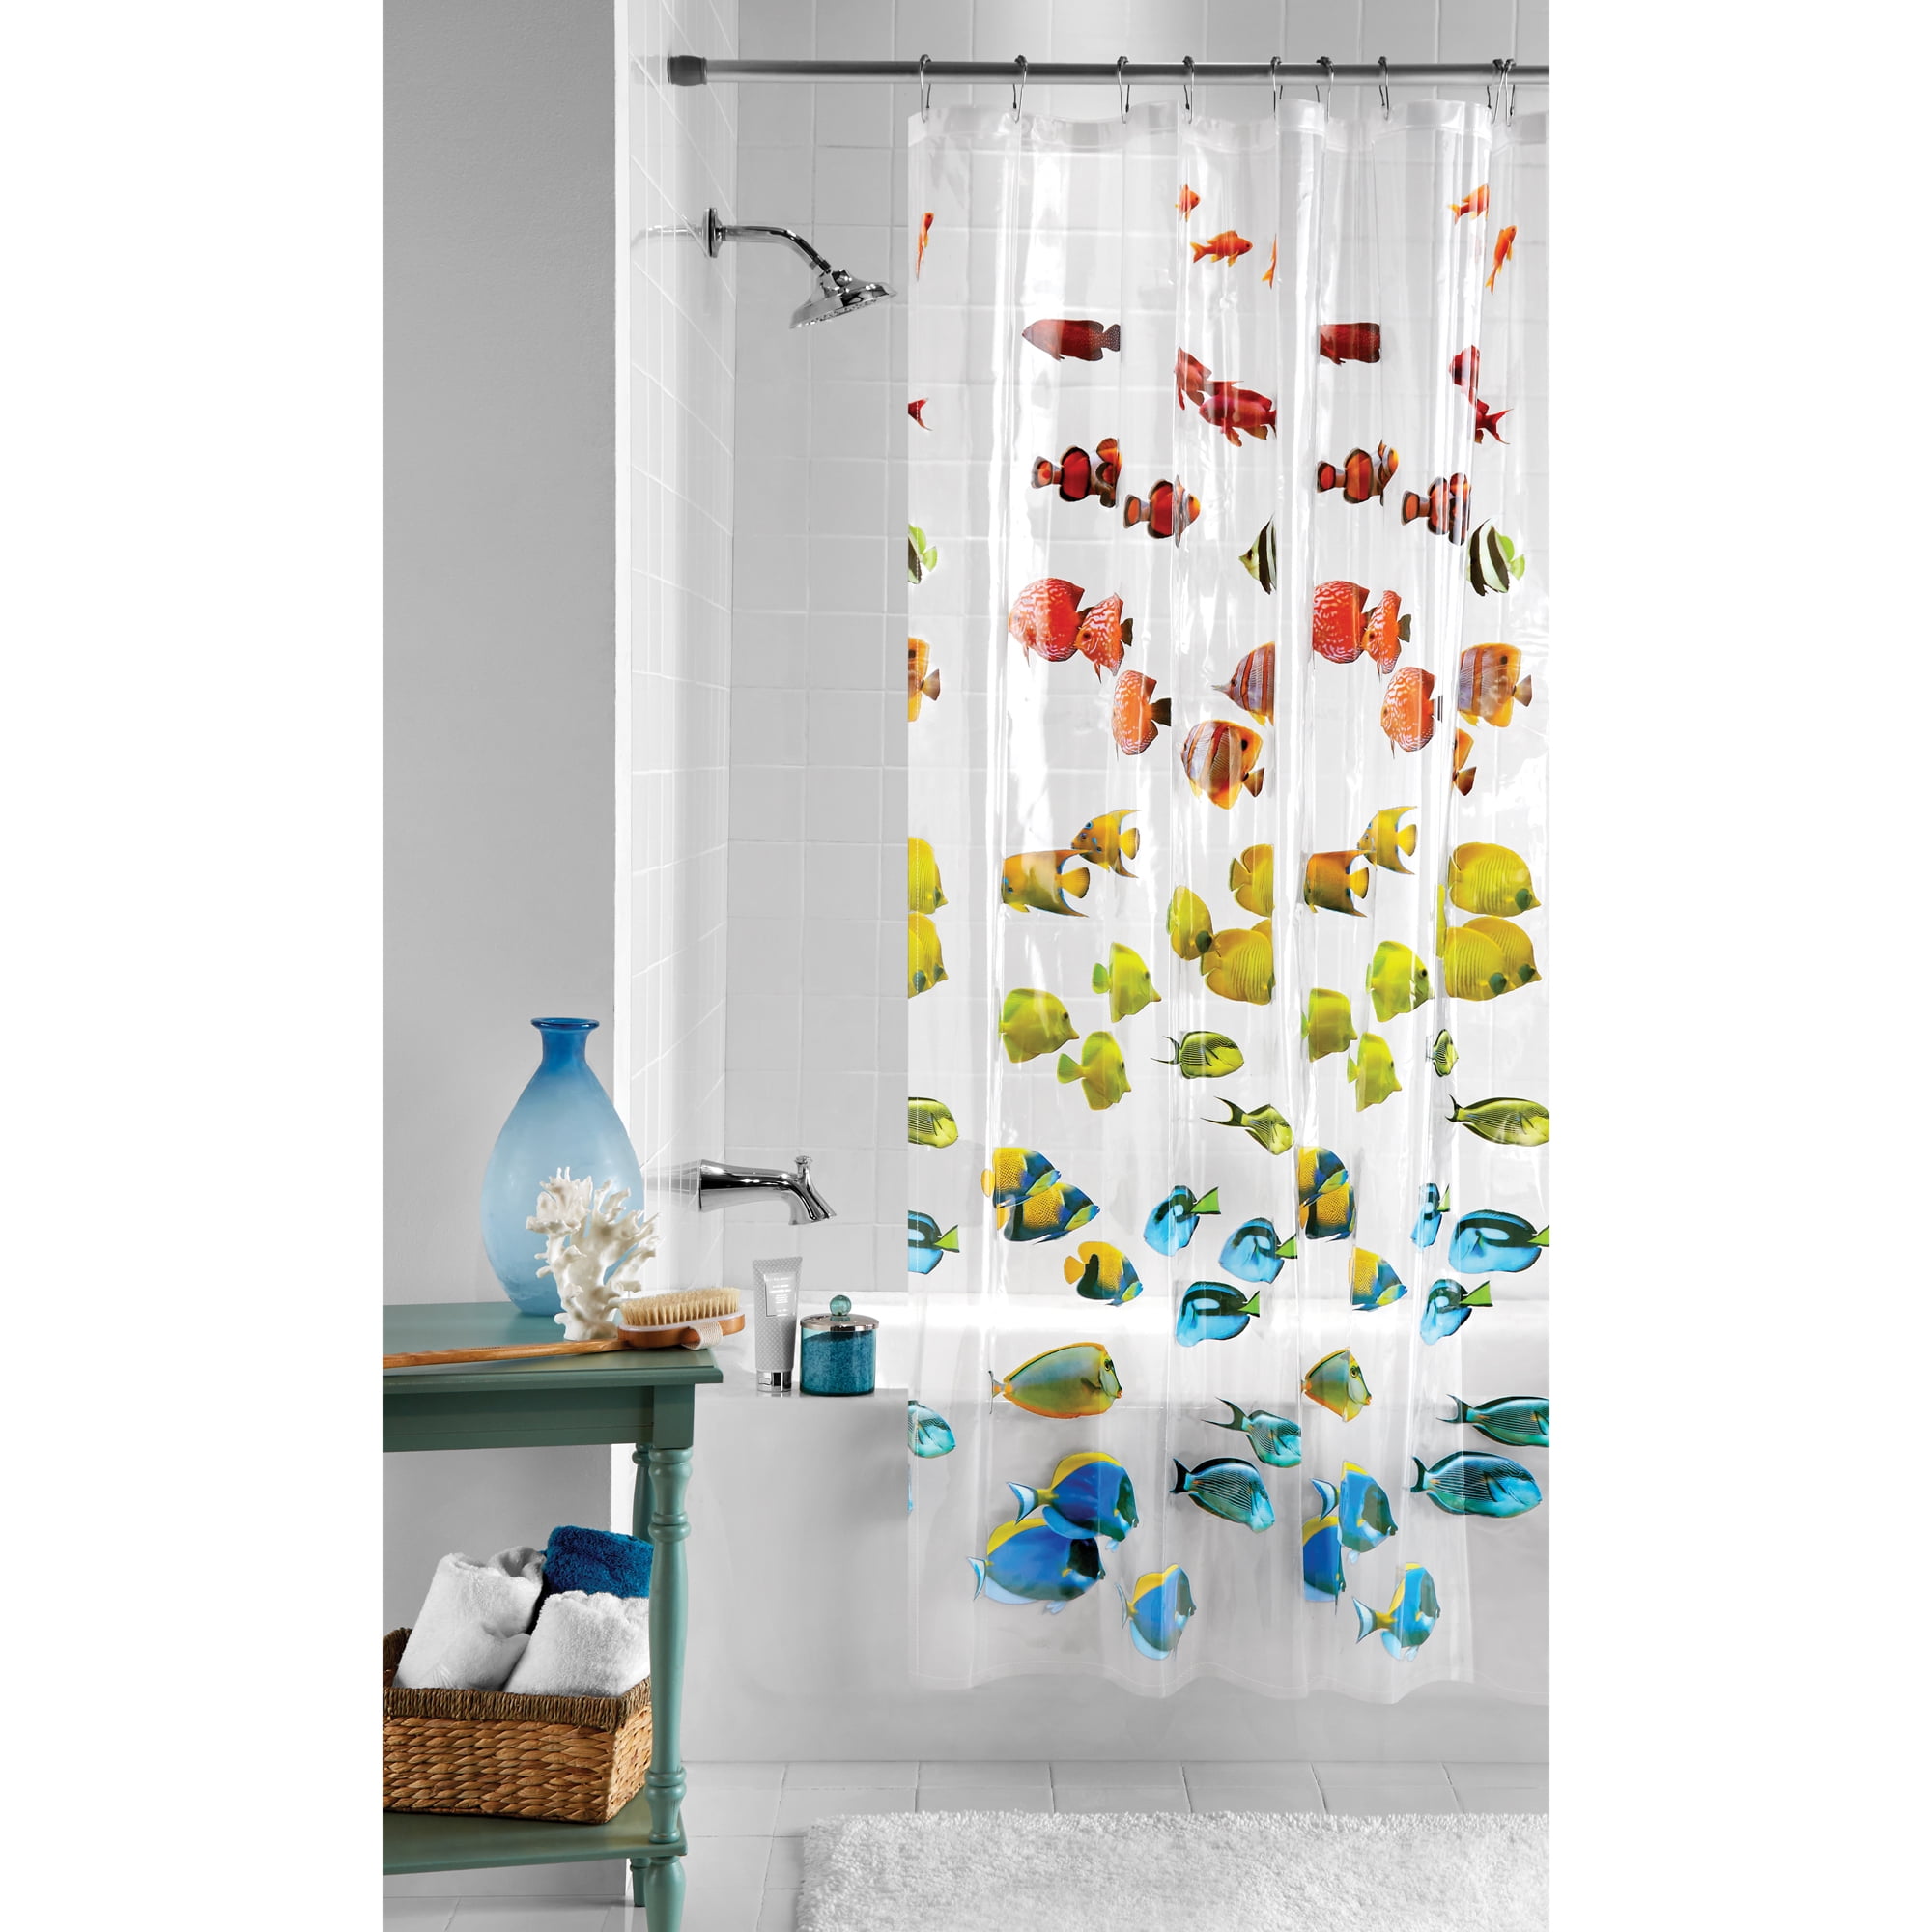 Details about   Digital Shower Curtain Abstract Paintbrush Print for Bathroom 